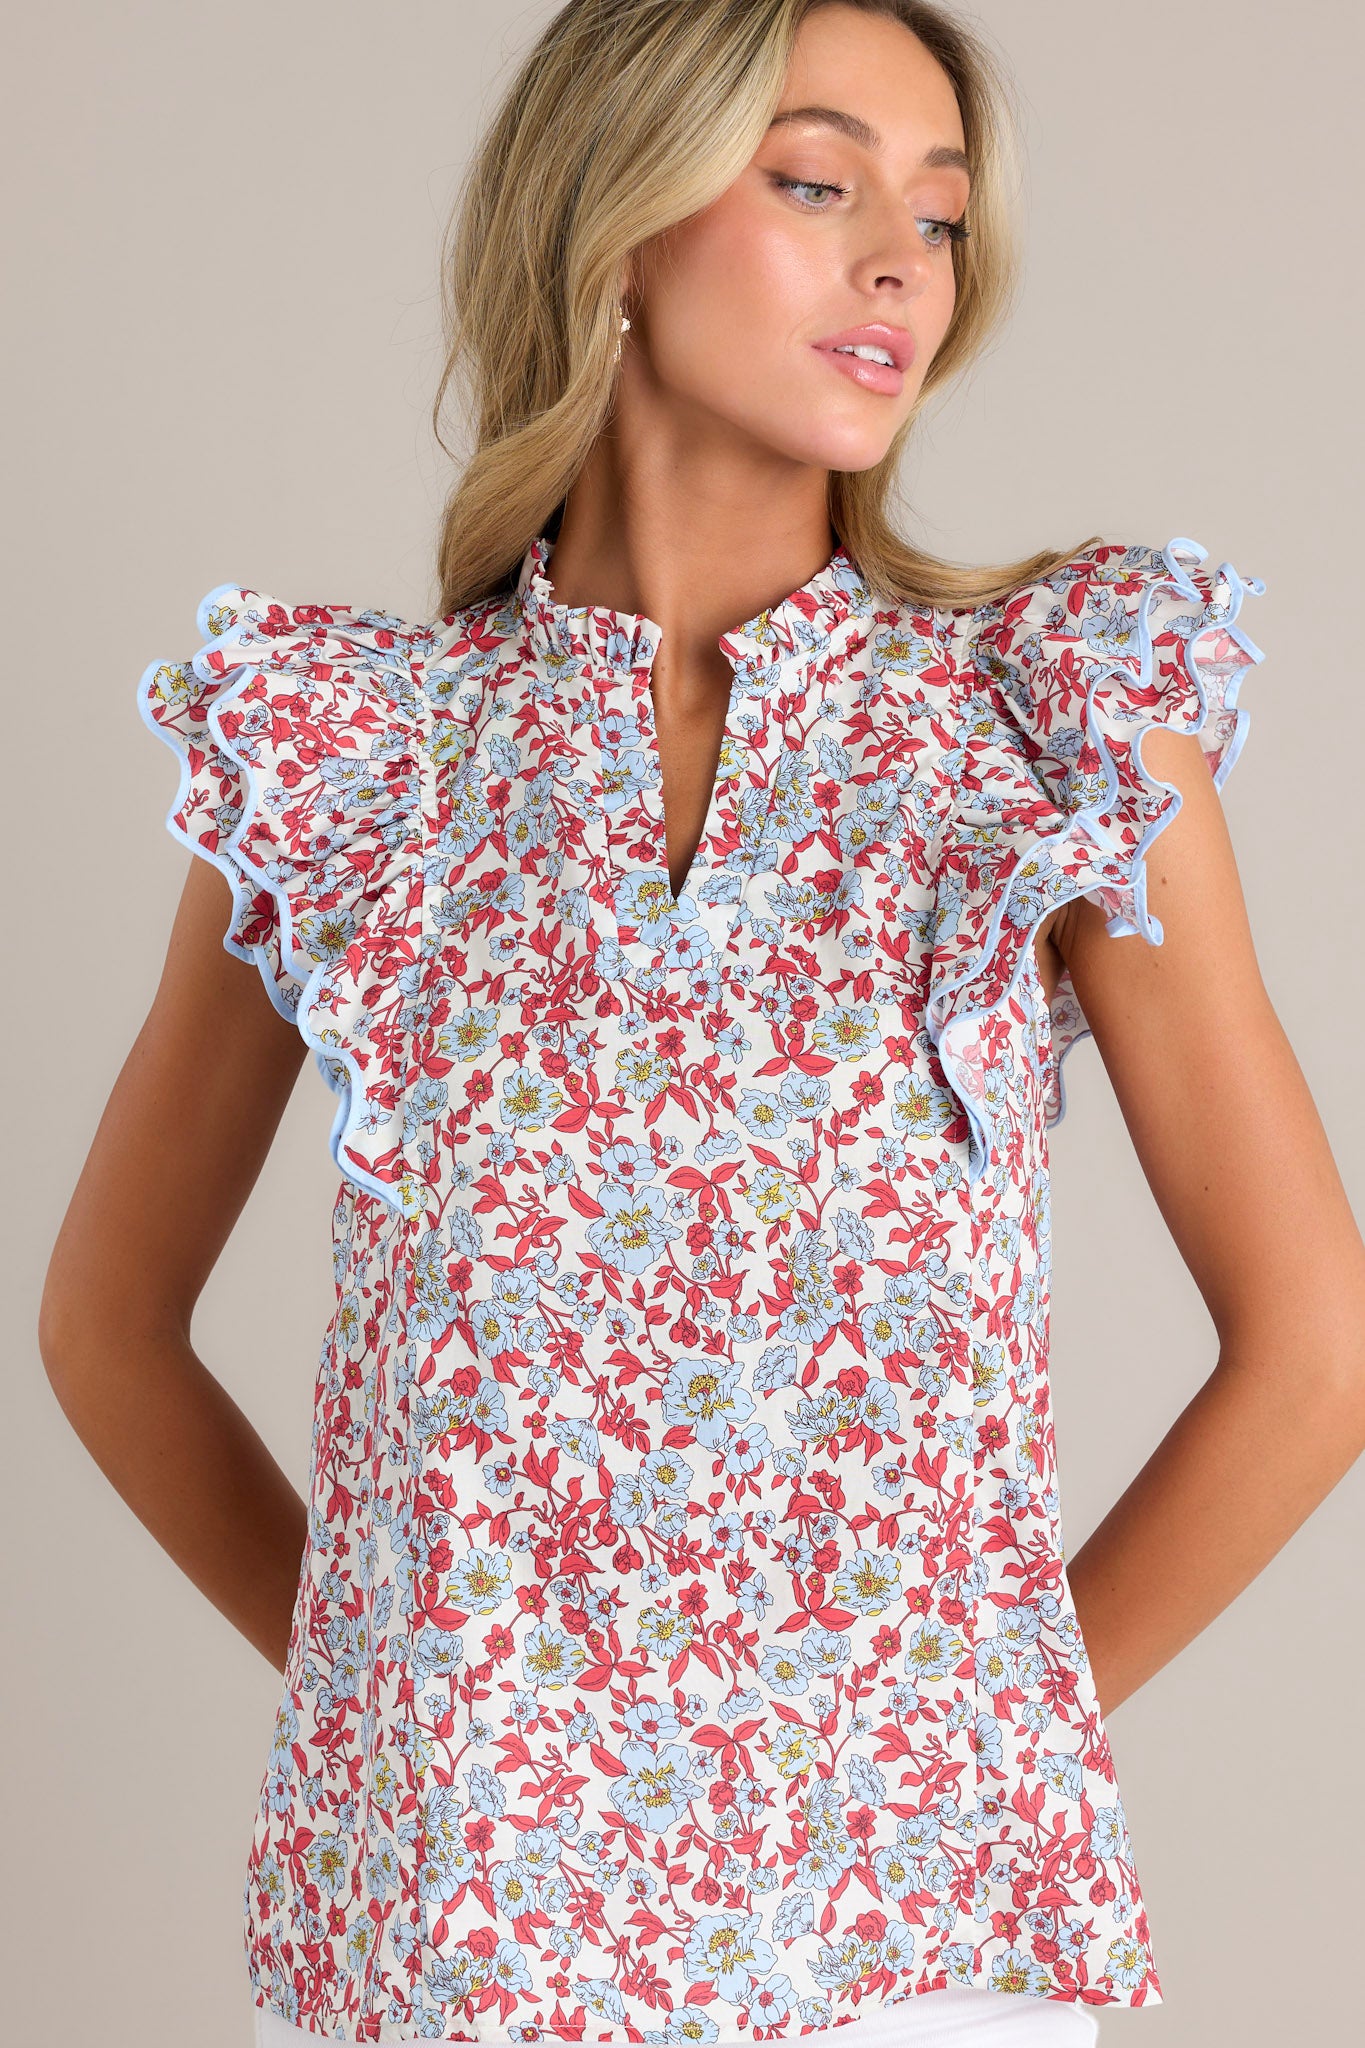 A detailed close-up of the red top highlighting the intricate ruffled v-neckline, the vibrant red & light blue floral print, and the ricrac trim on the short sleeves.